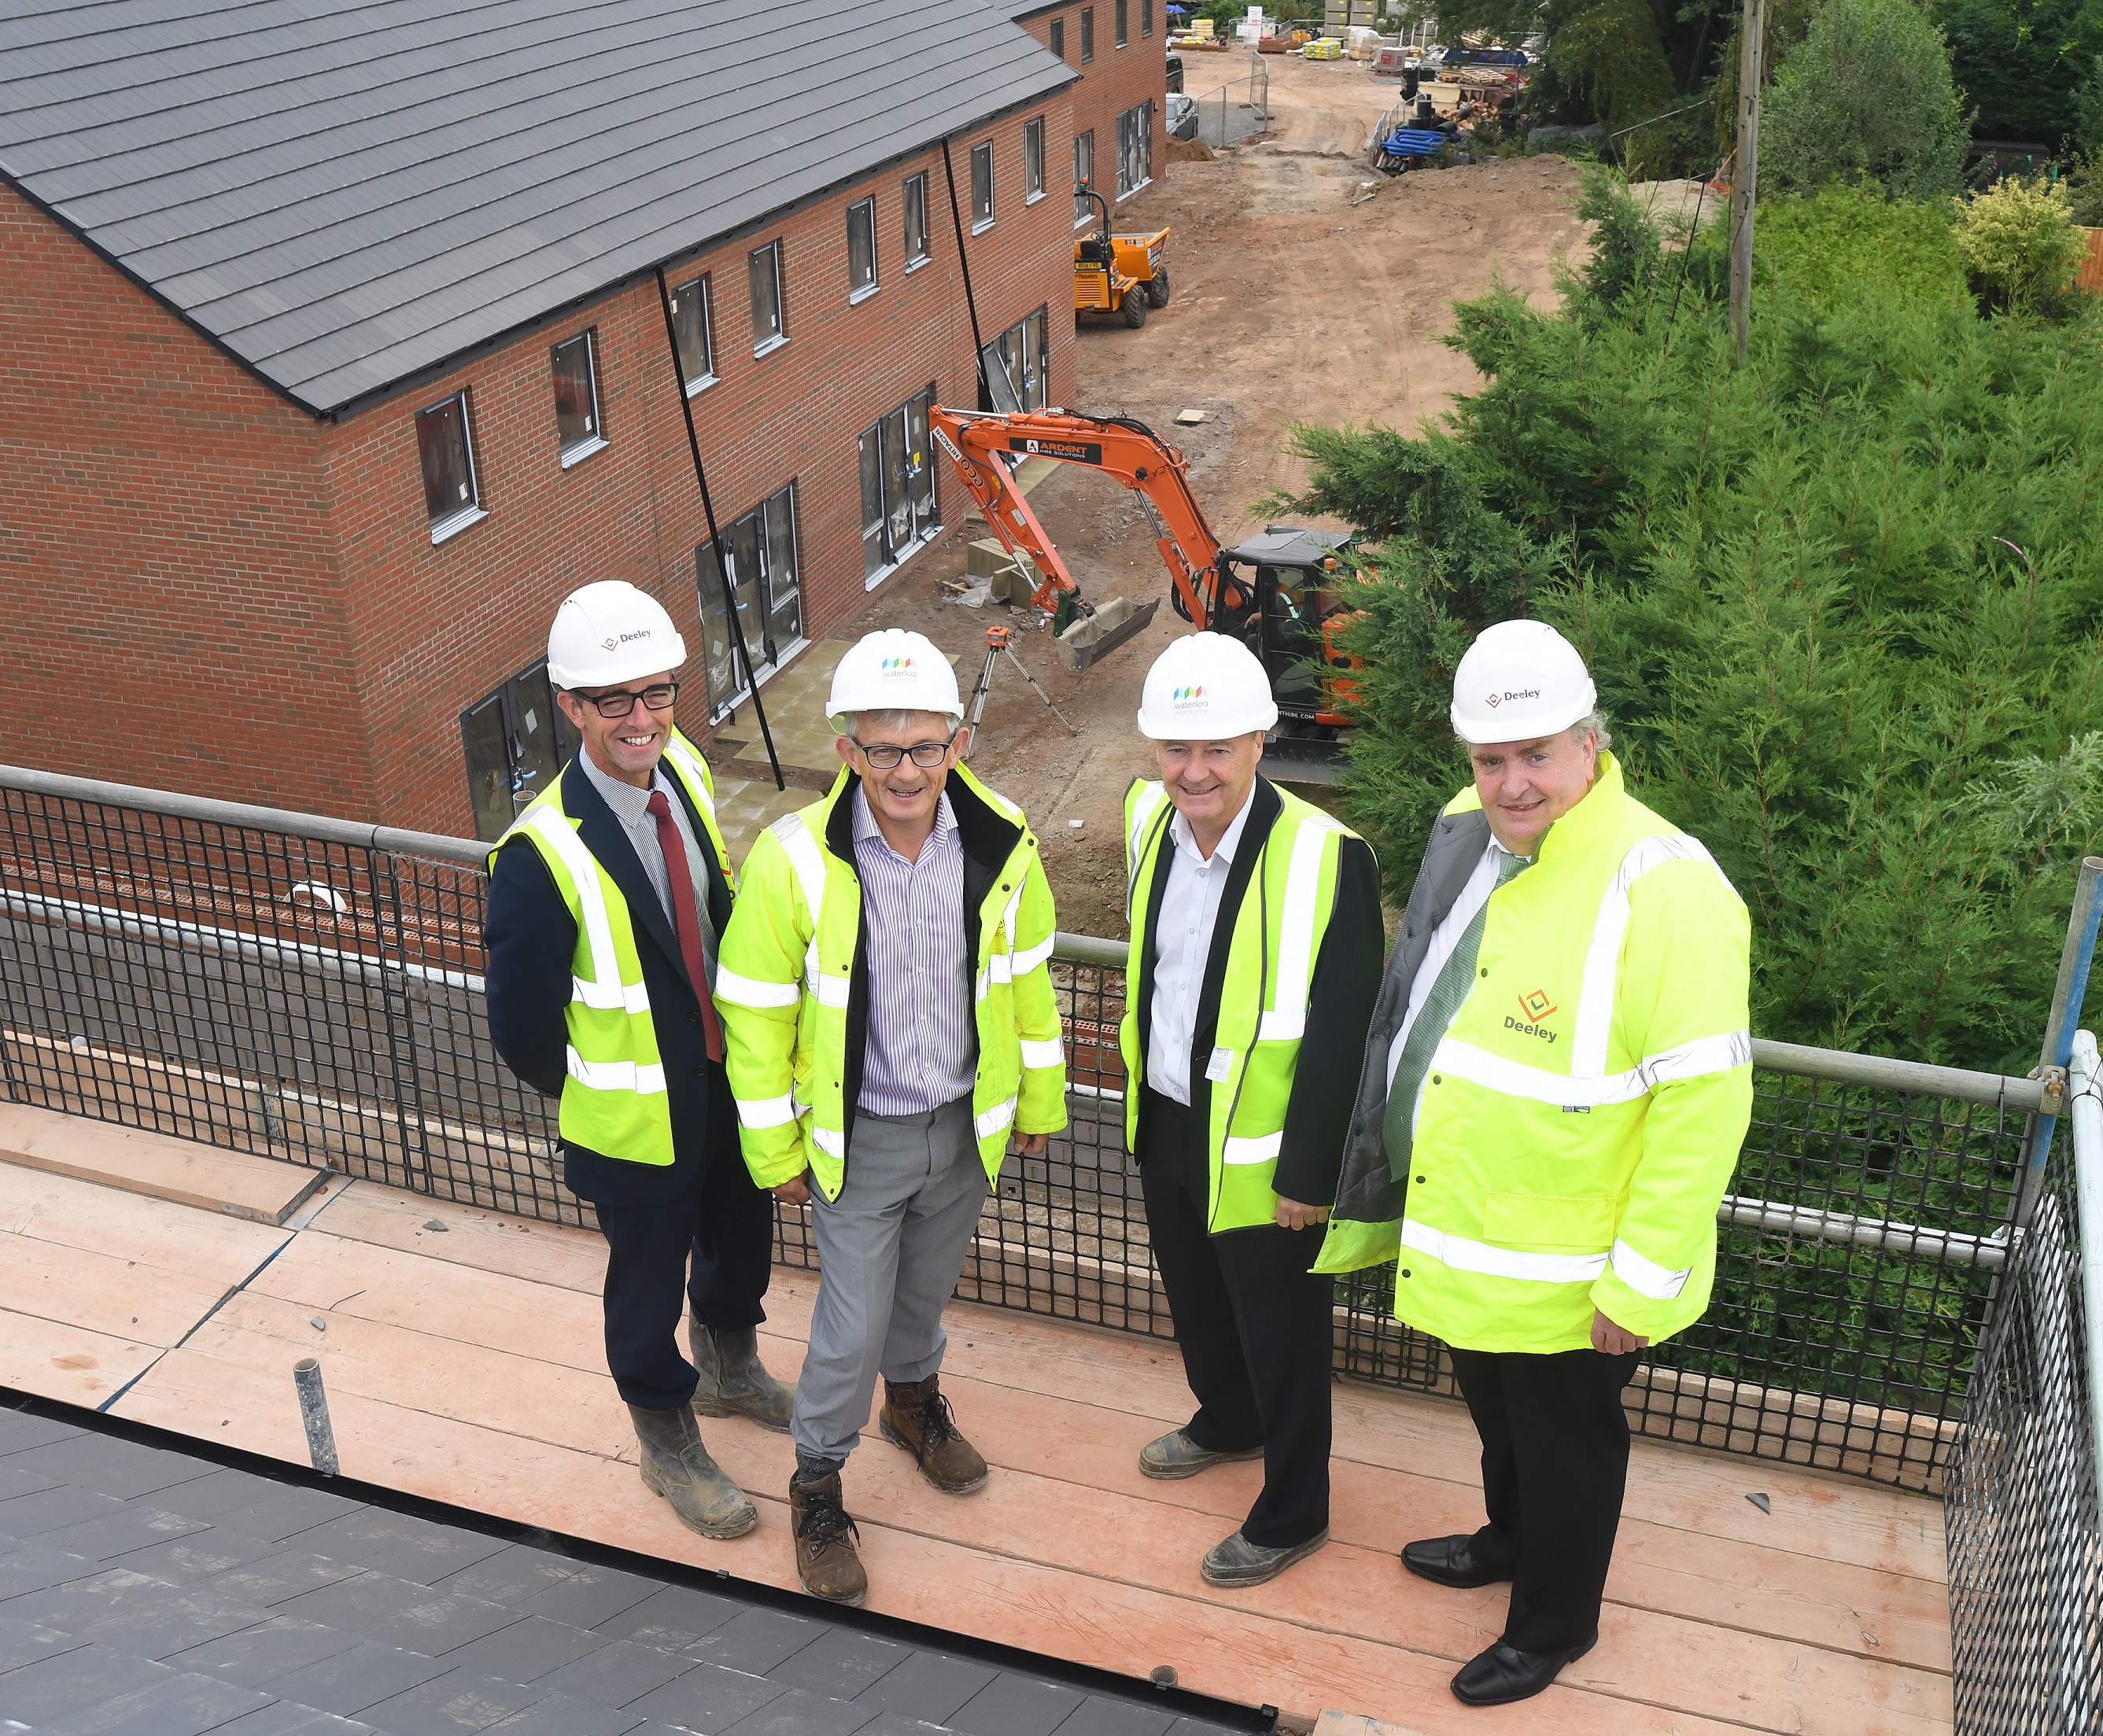 Affordable homes development in Leamington hits new heights